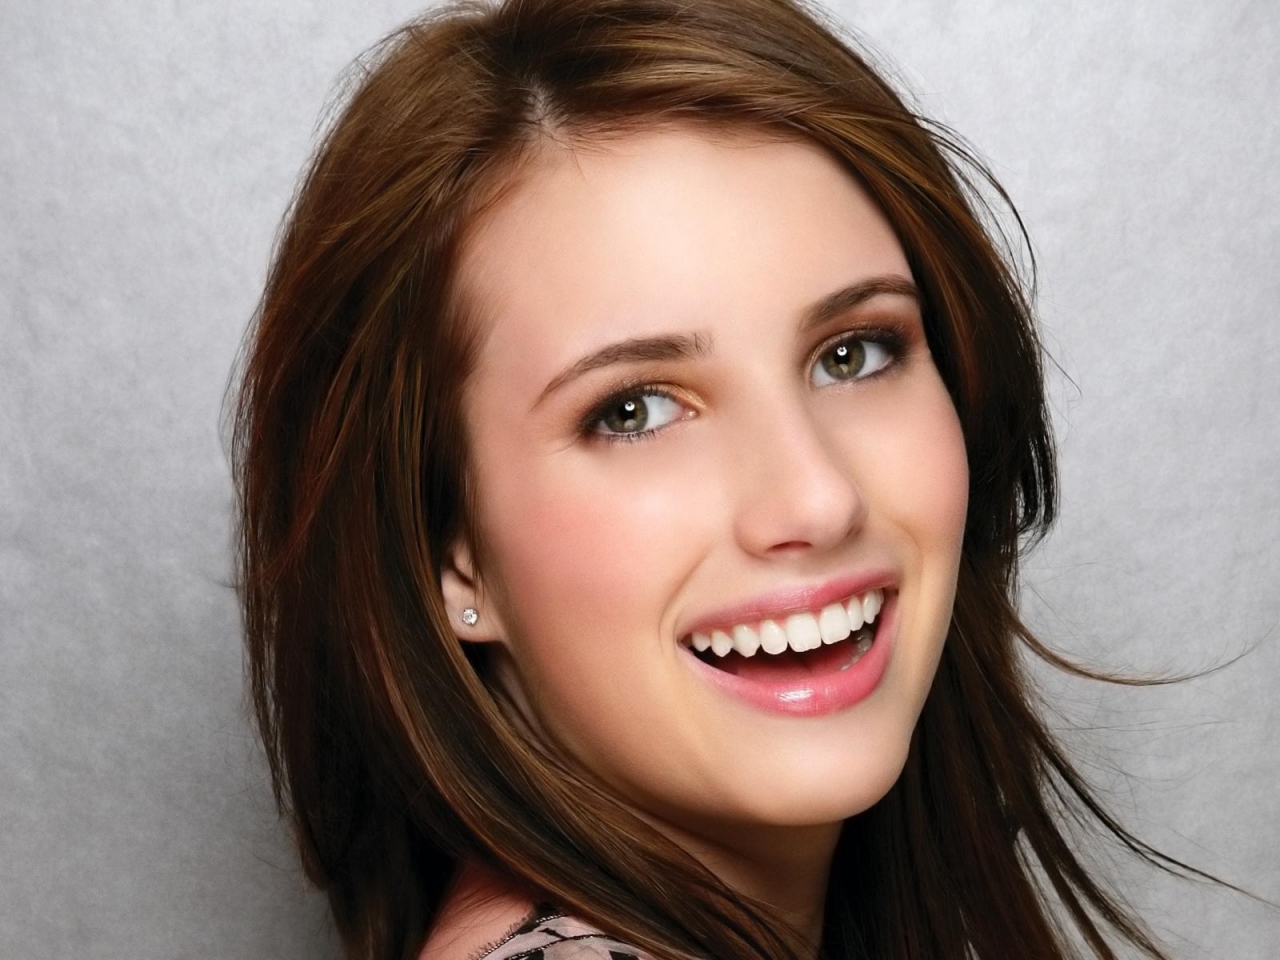 Emma Roberts Smile for 1280 x 960 resolution